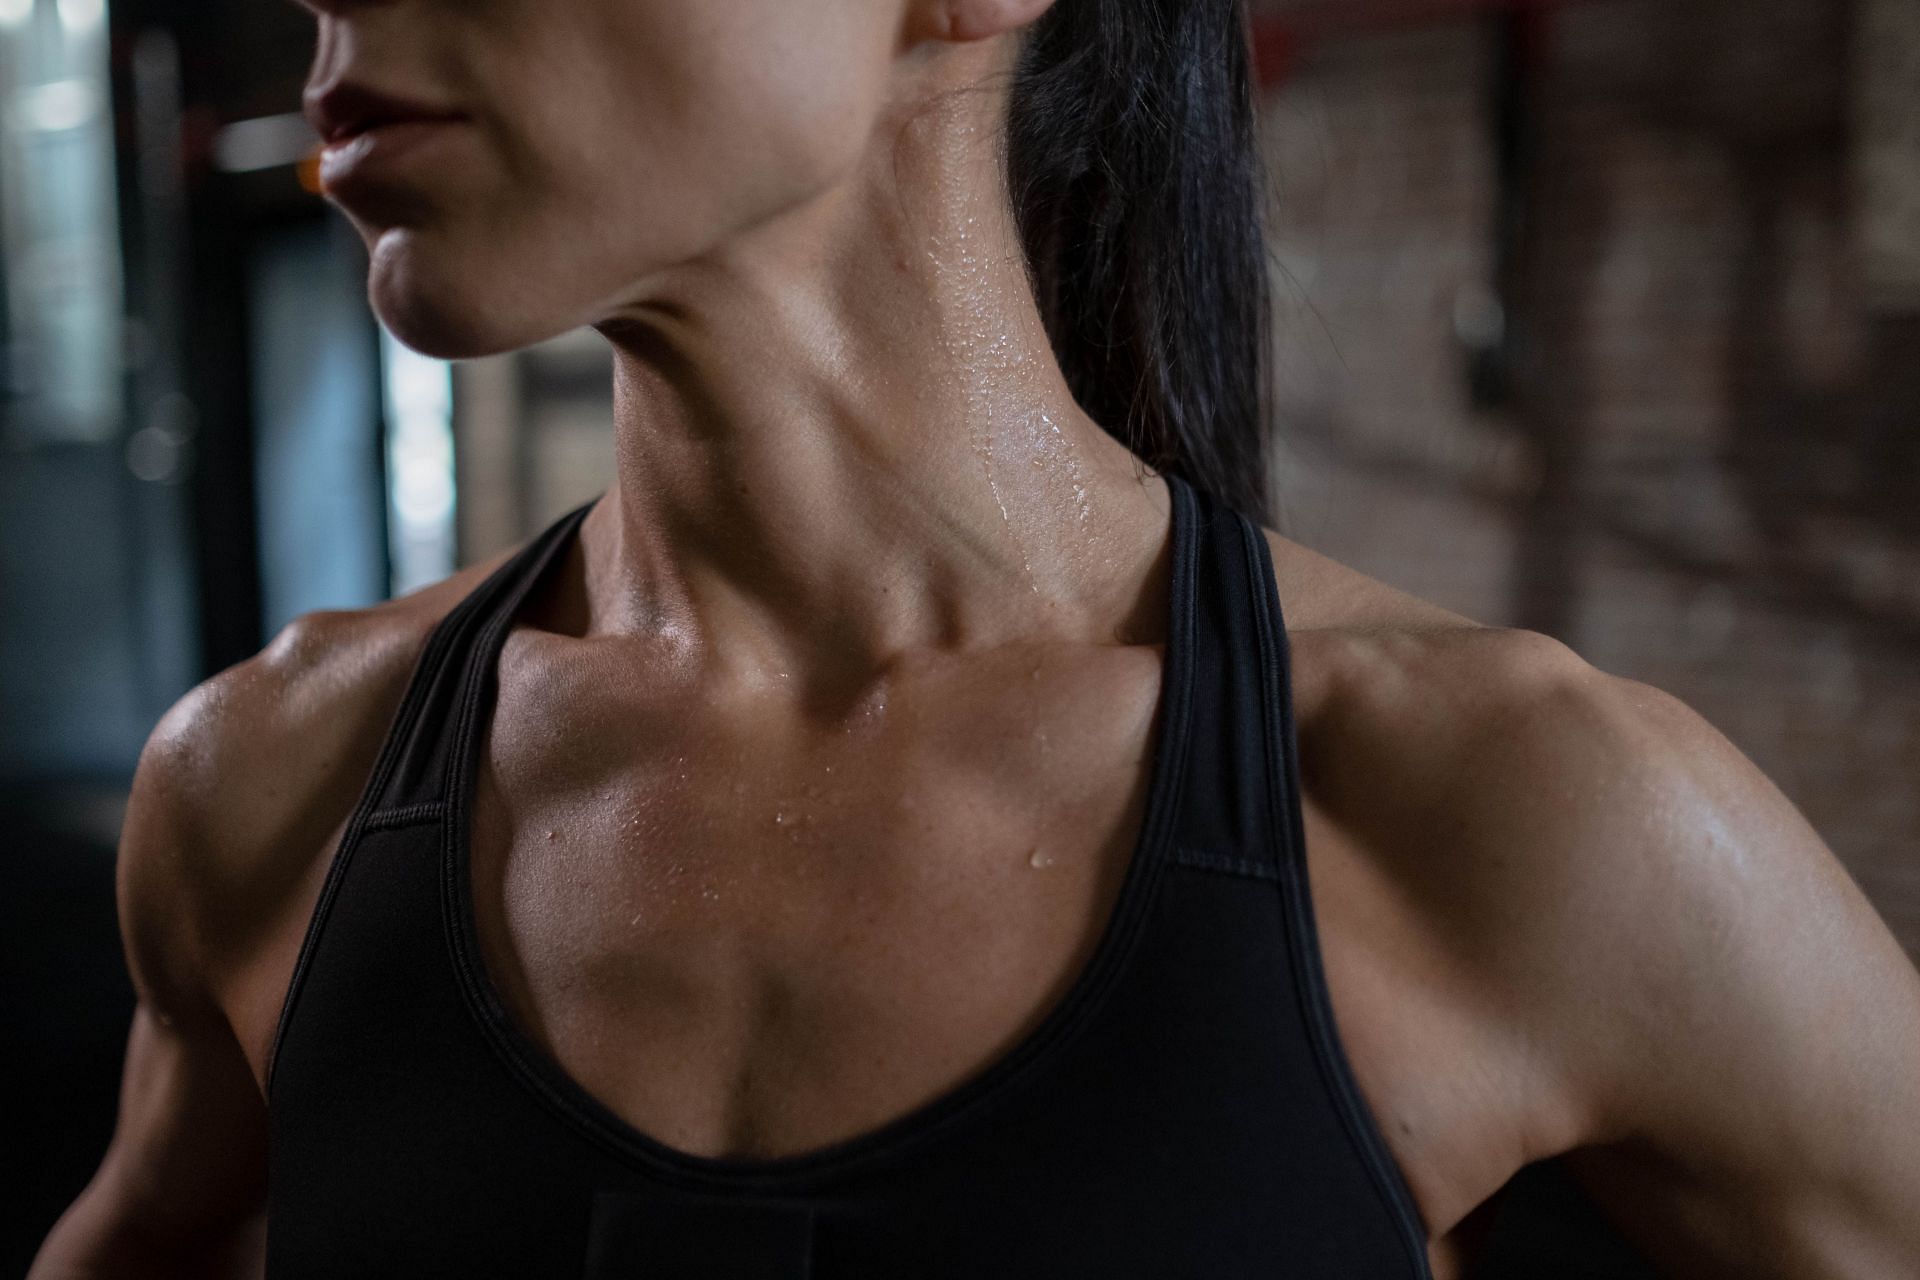 Exercises can help release tightness from the chest and shoulders. (Image via Pexels/ Cottonbro)